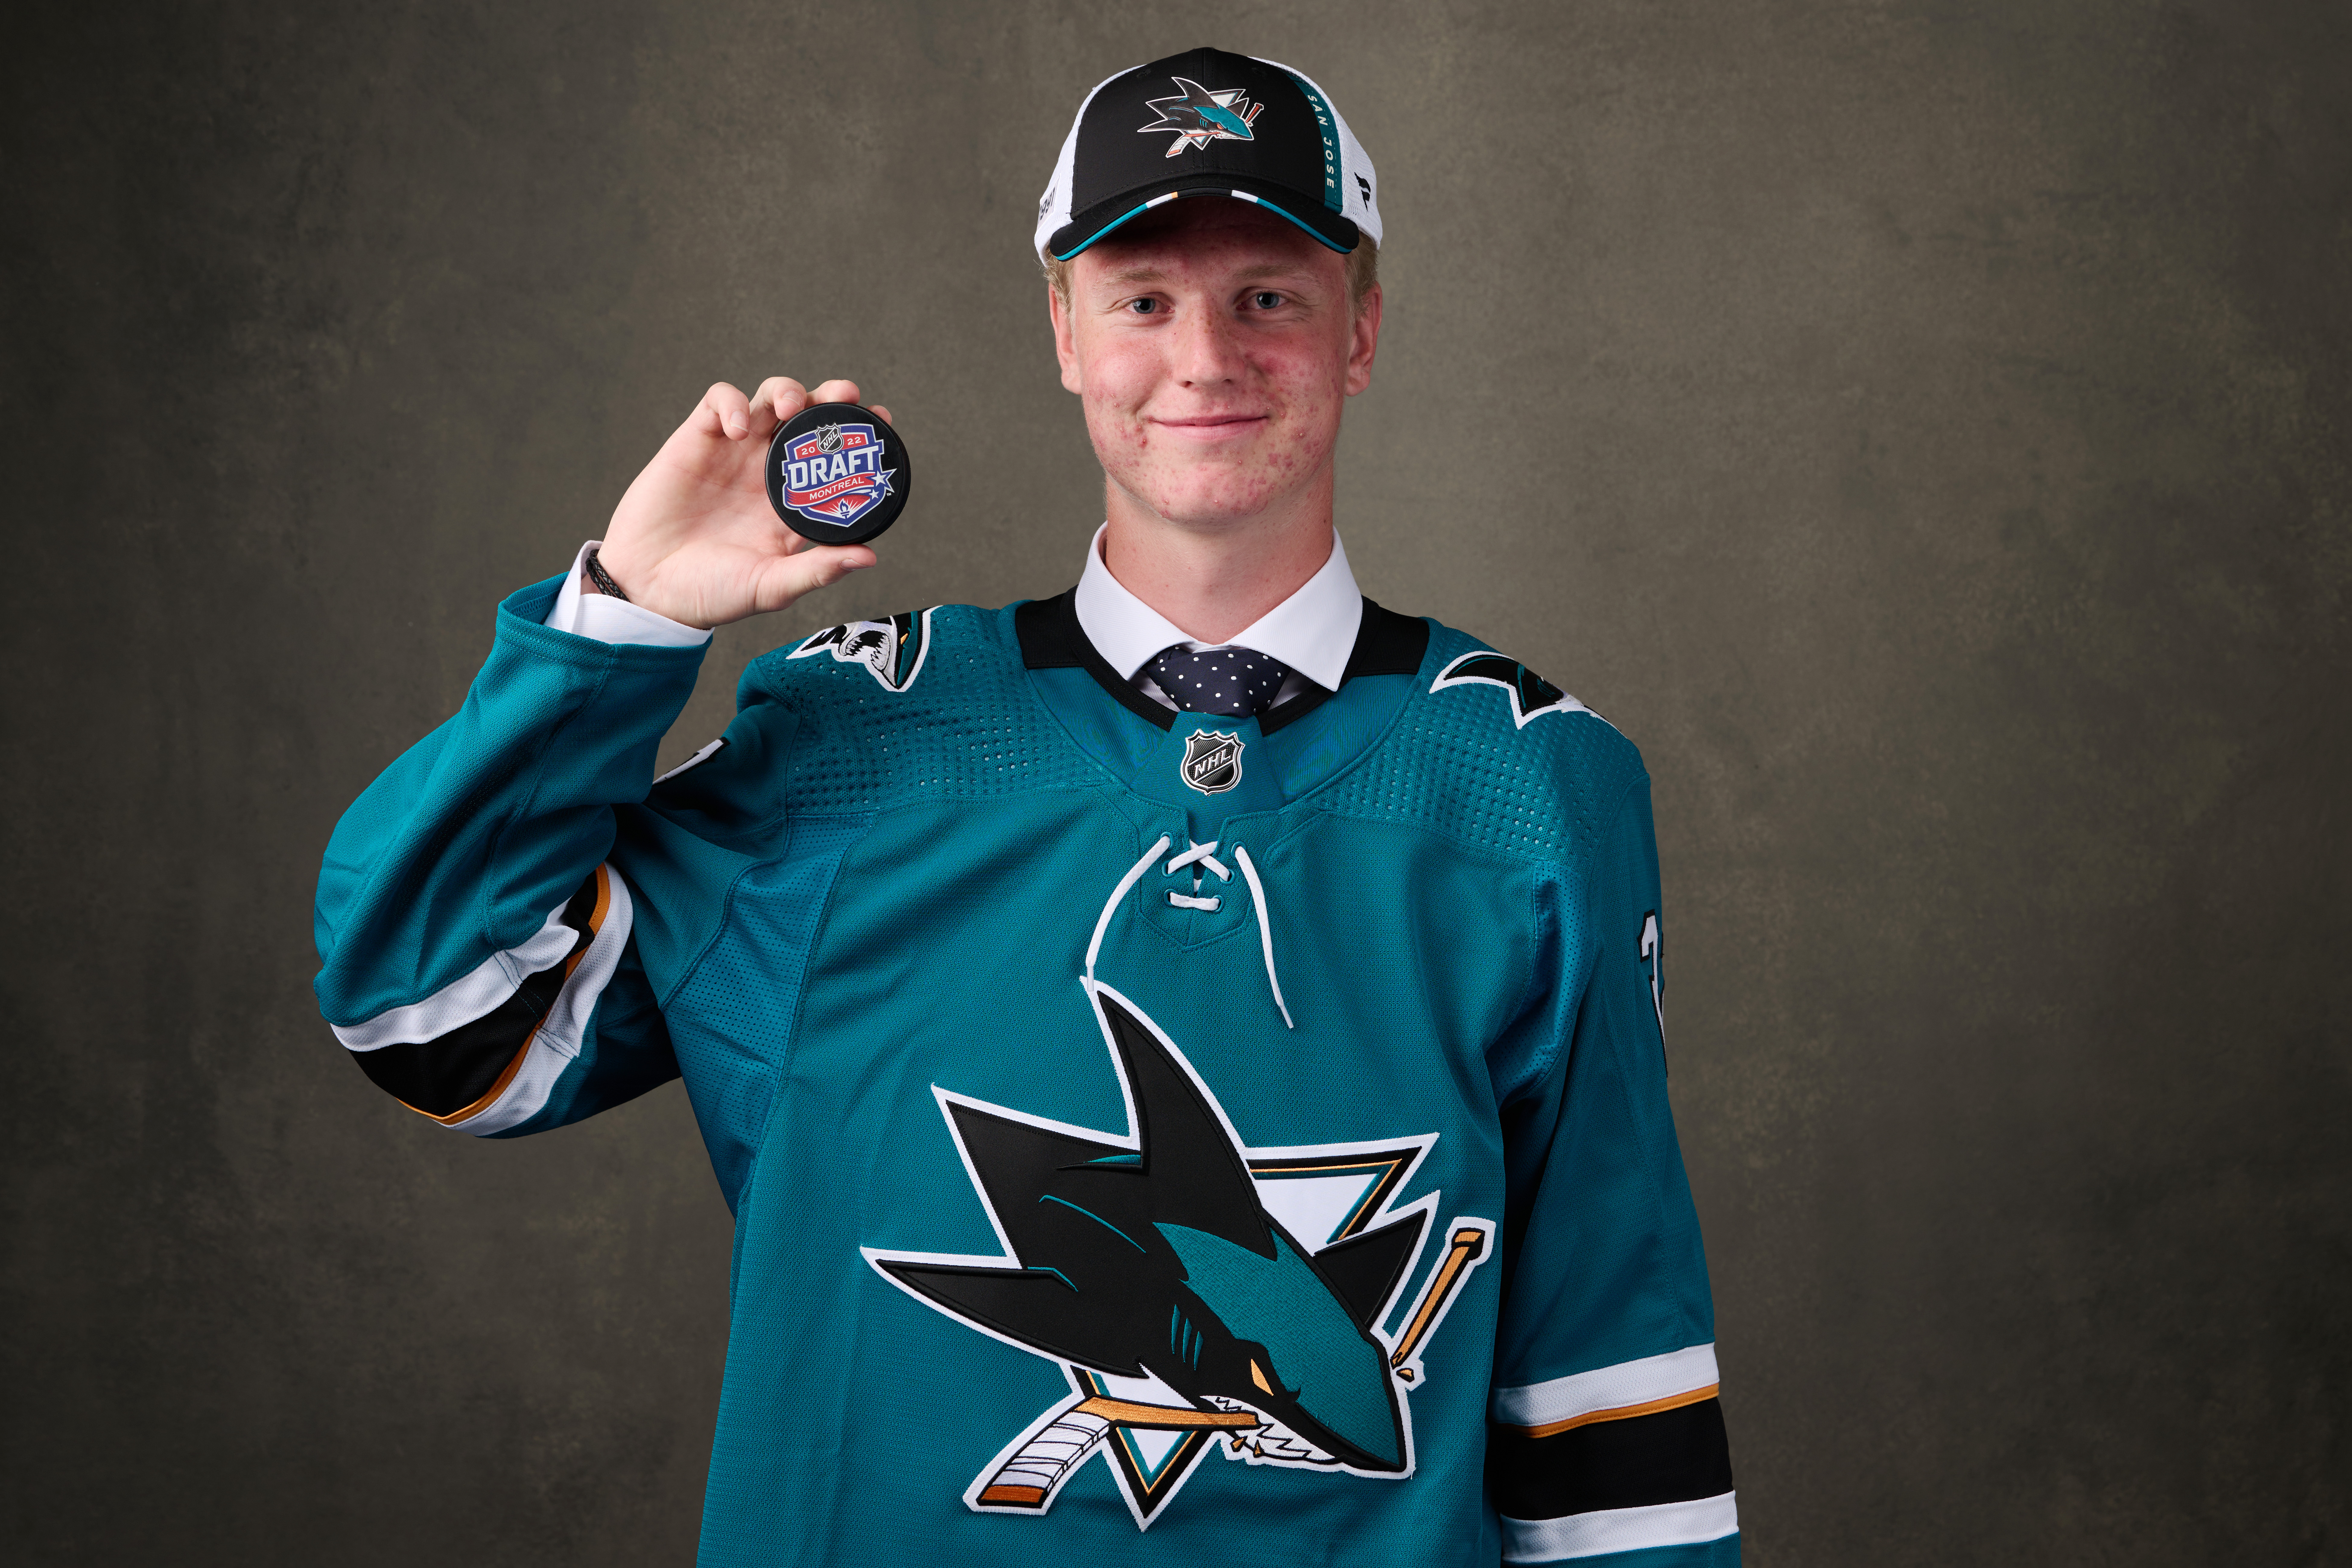 Filip Bystedt, #27 pick by the San Jose Sharks, poses for a portrait during the 2022 Upper Deck NHL Draft at Bell Centre on July 07, 2022 in Montreal, Quebec, Canada.